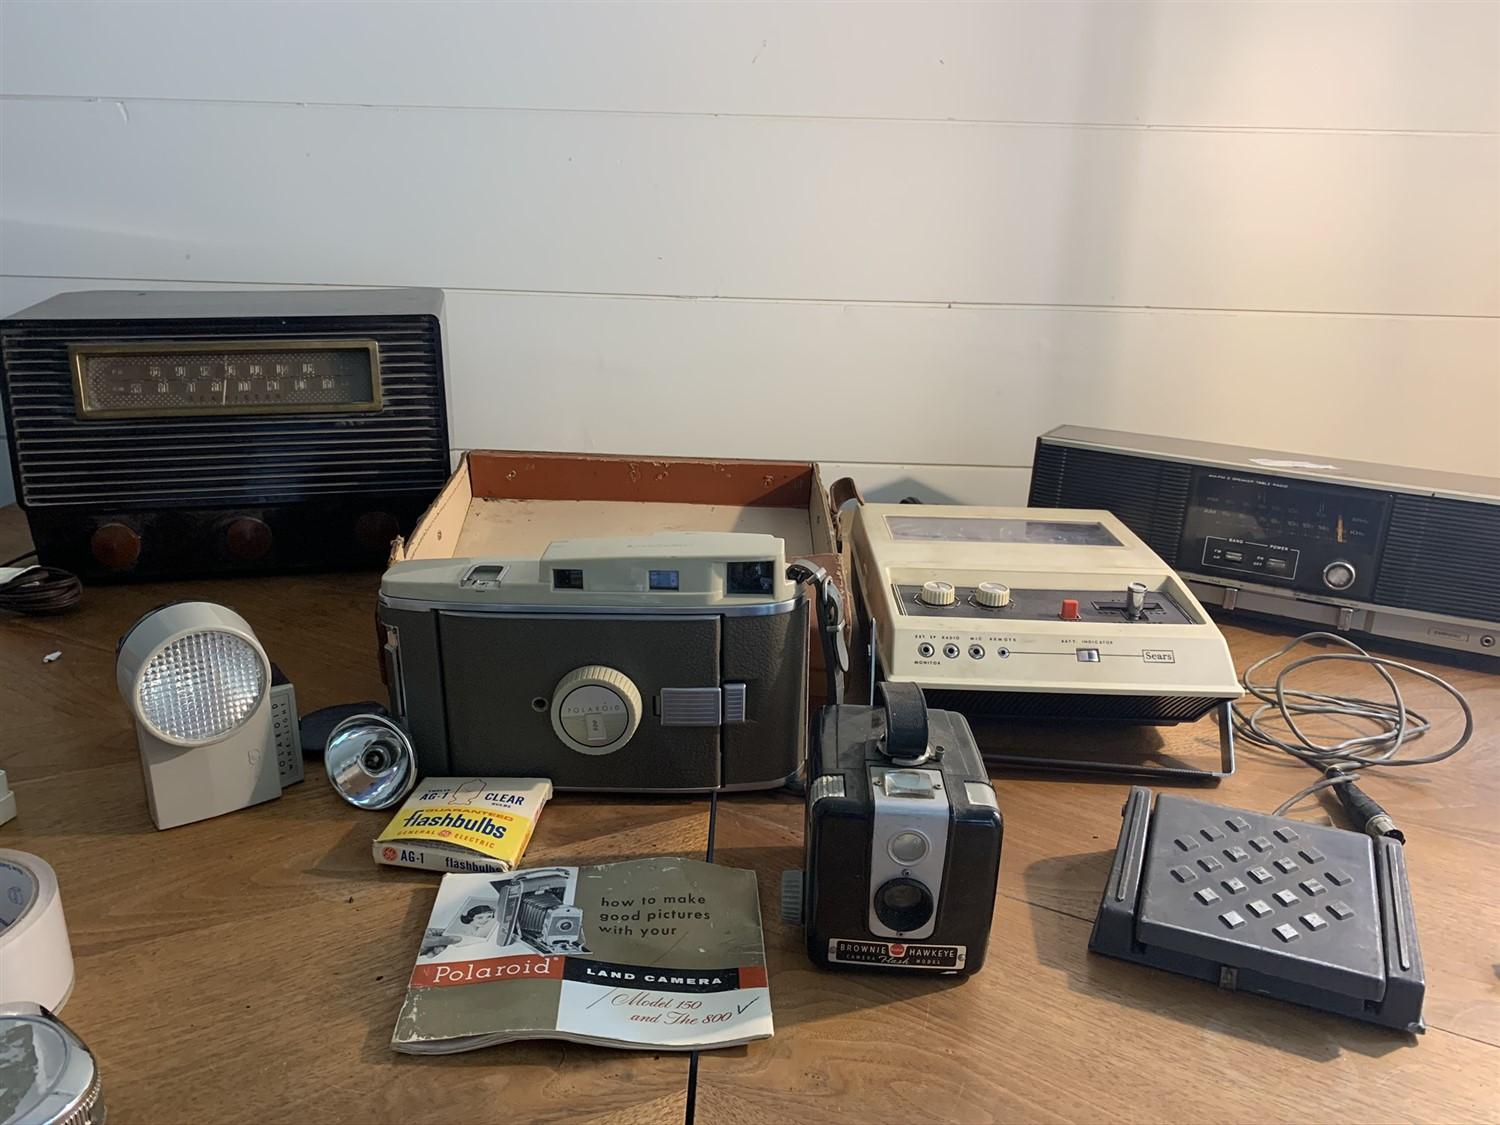 Lot of old radios and cameras